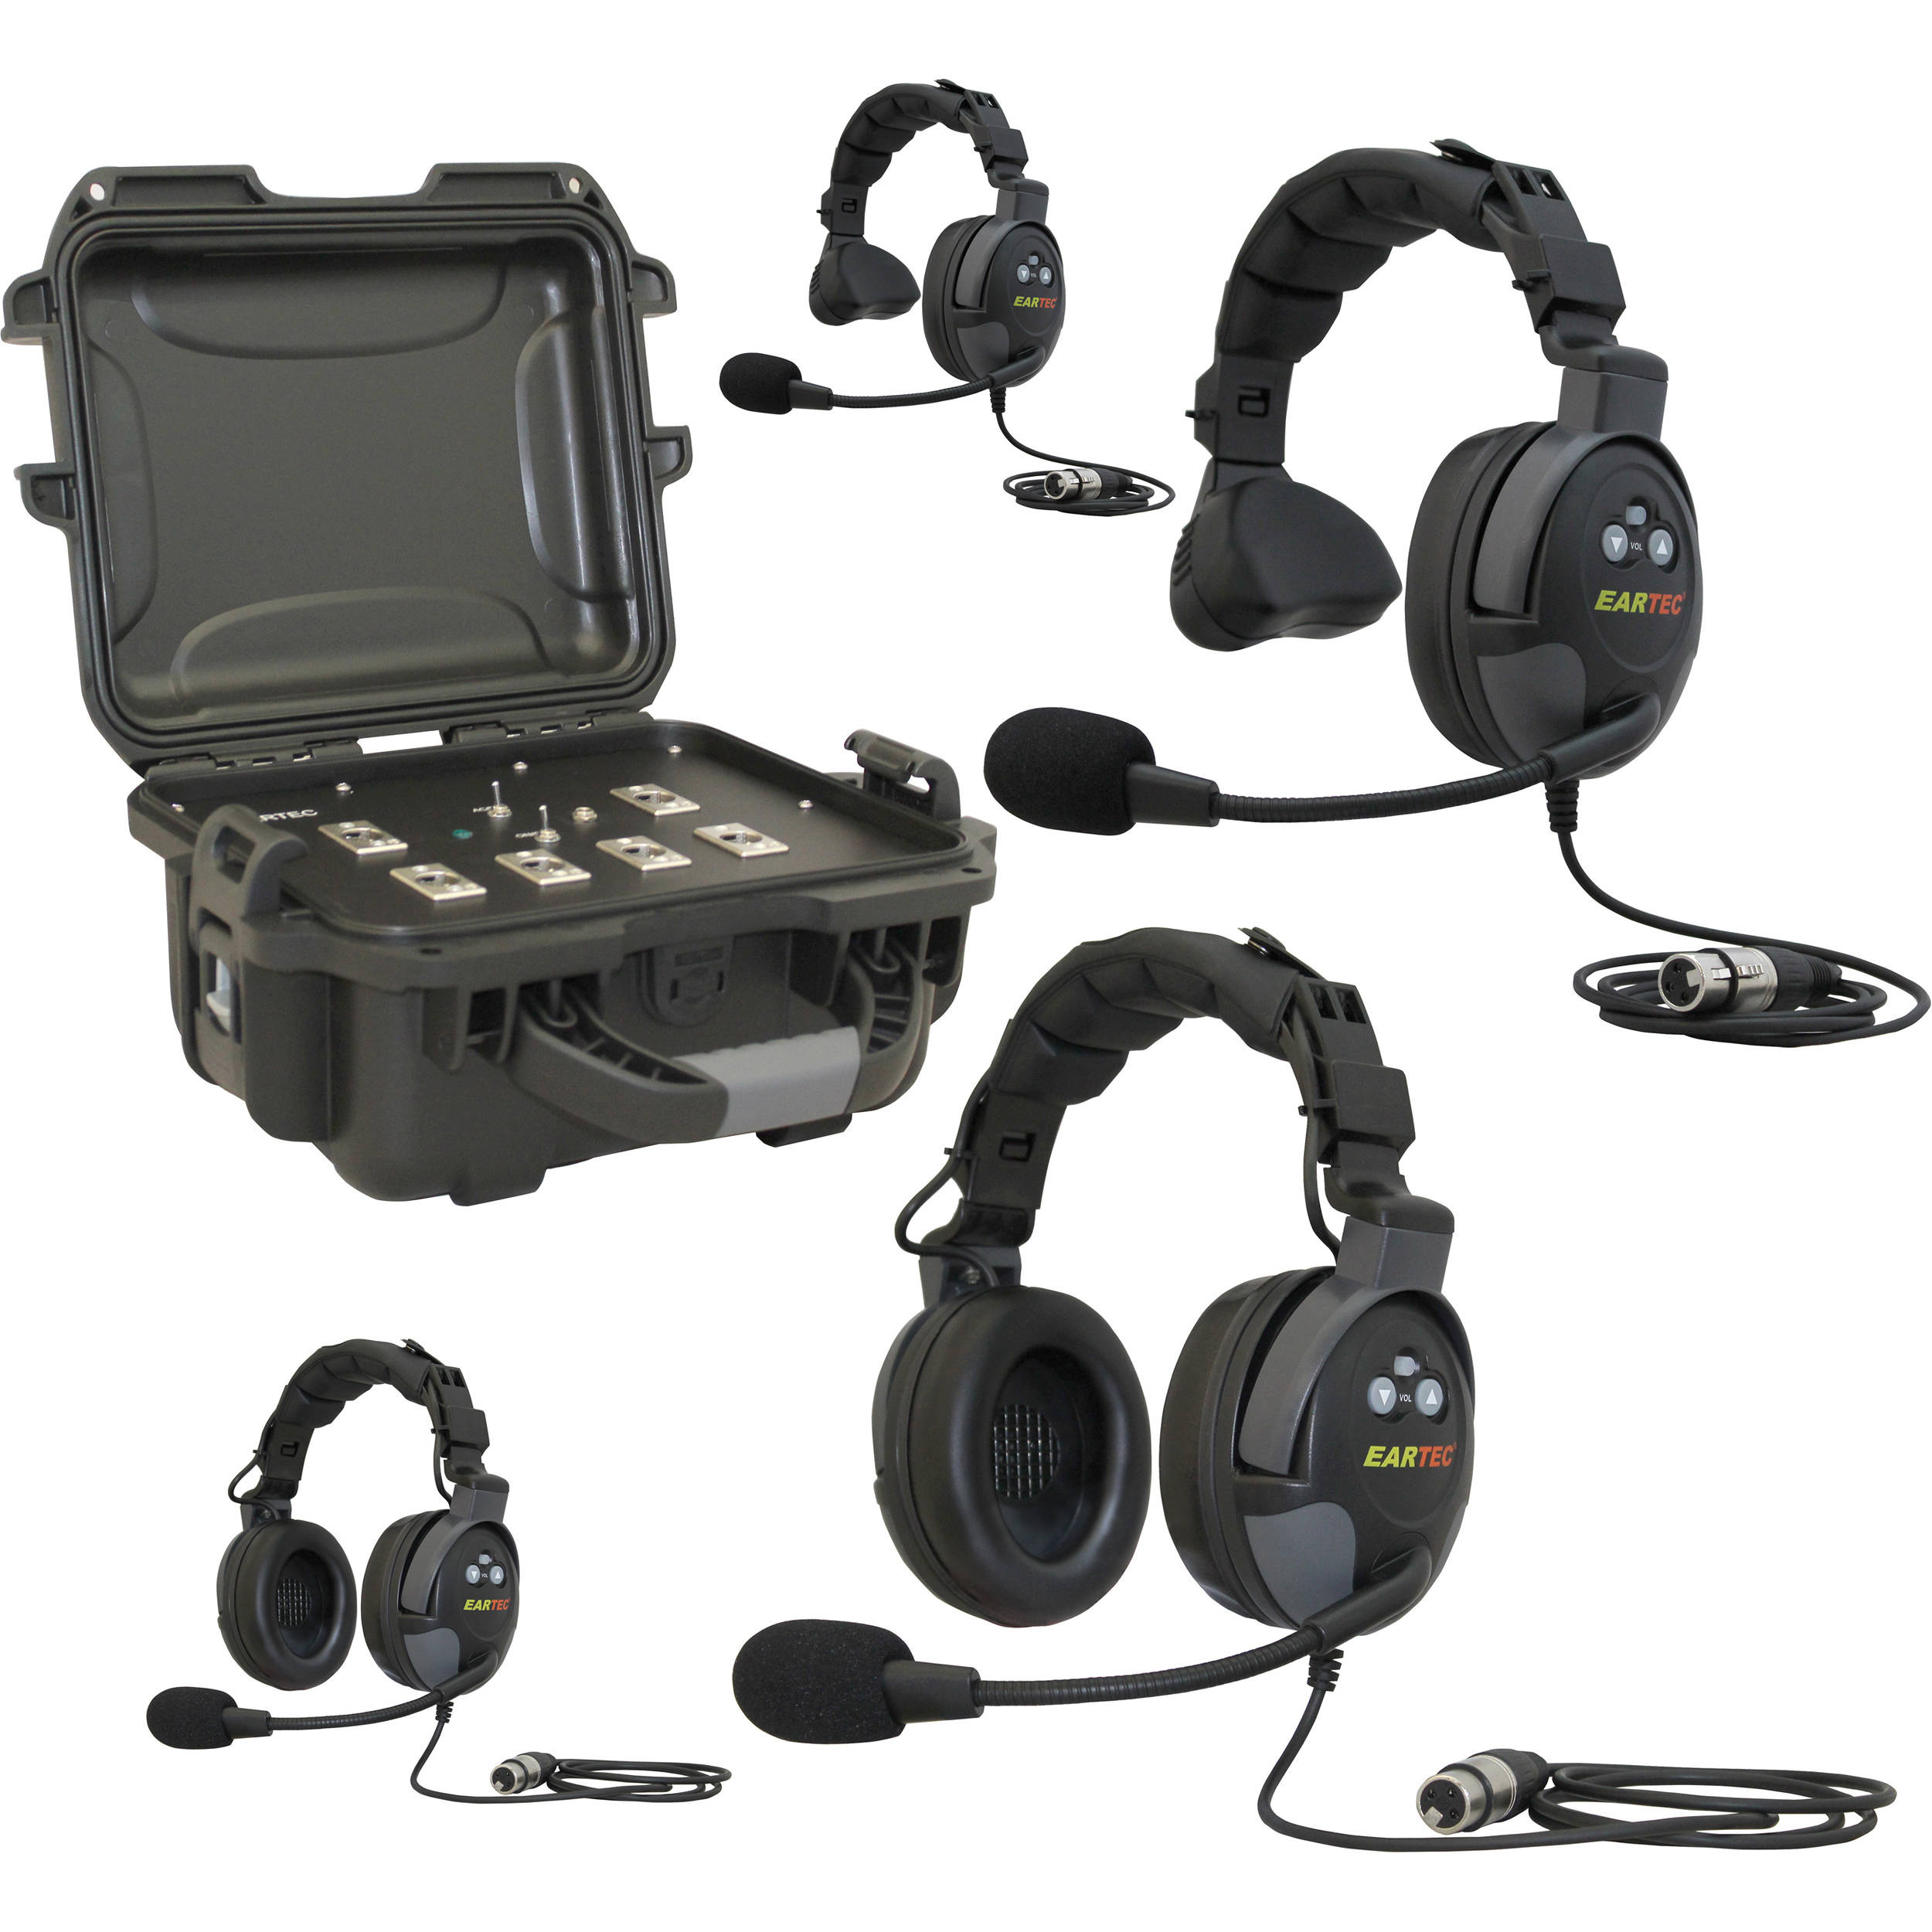 Eartec TCS-4000PL Wired Intercom with 4 Headsets (2 Single-Eared, 2 Dual-Eared)